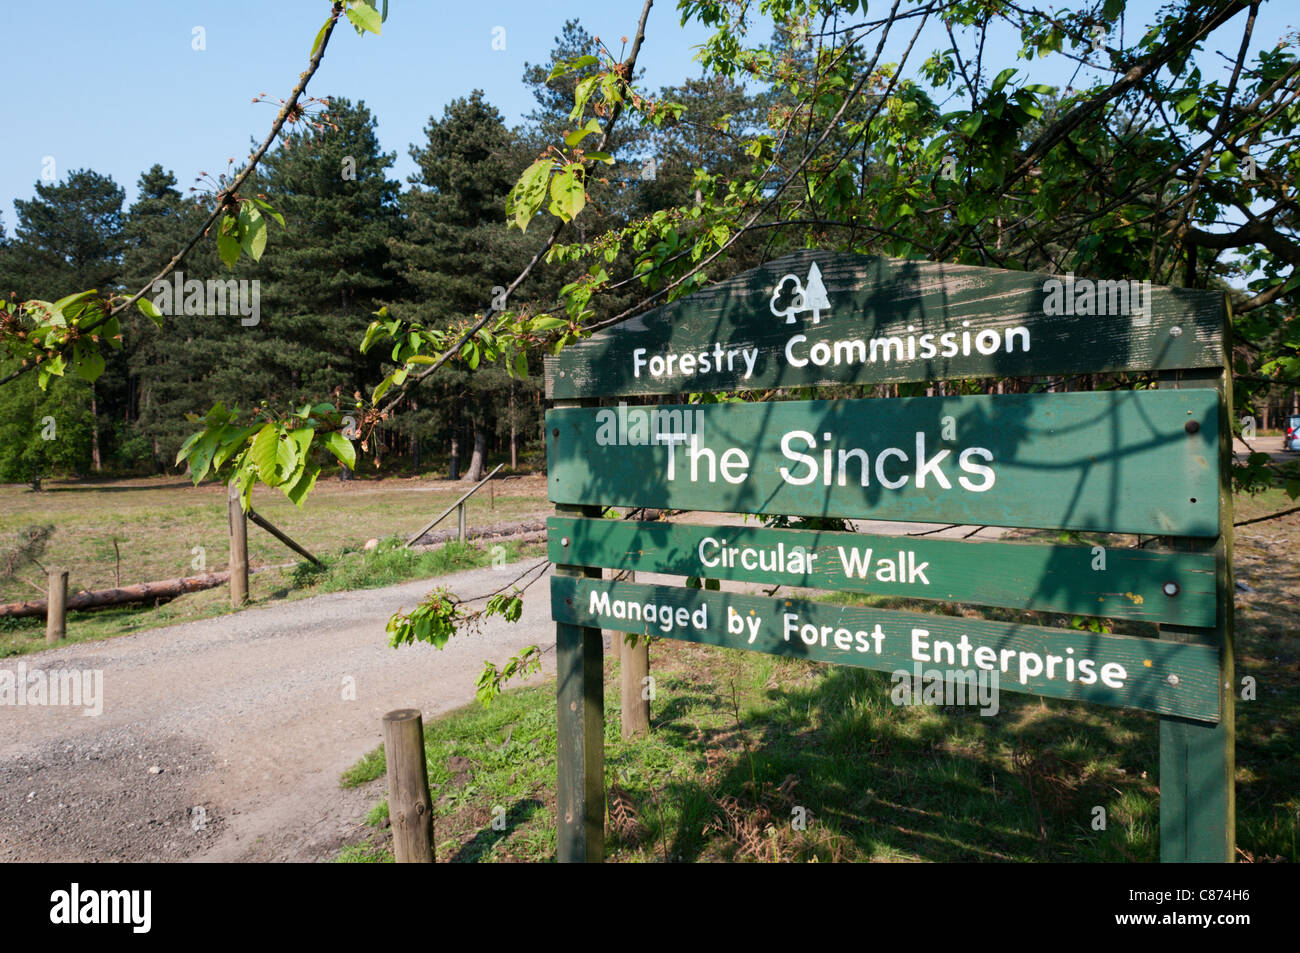 Sign for a circular walk at The Sincks Forestry Commission woodland in Thetford Forest Park. Stock Photo